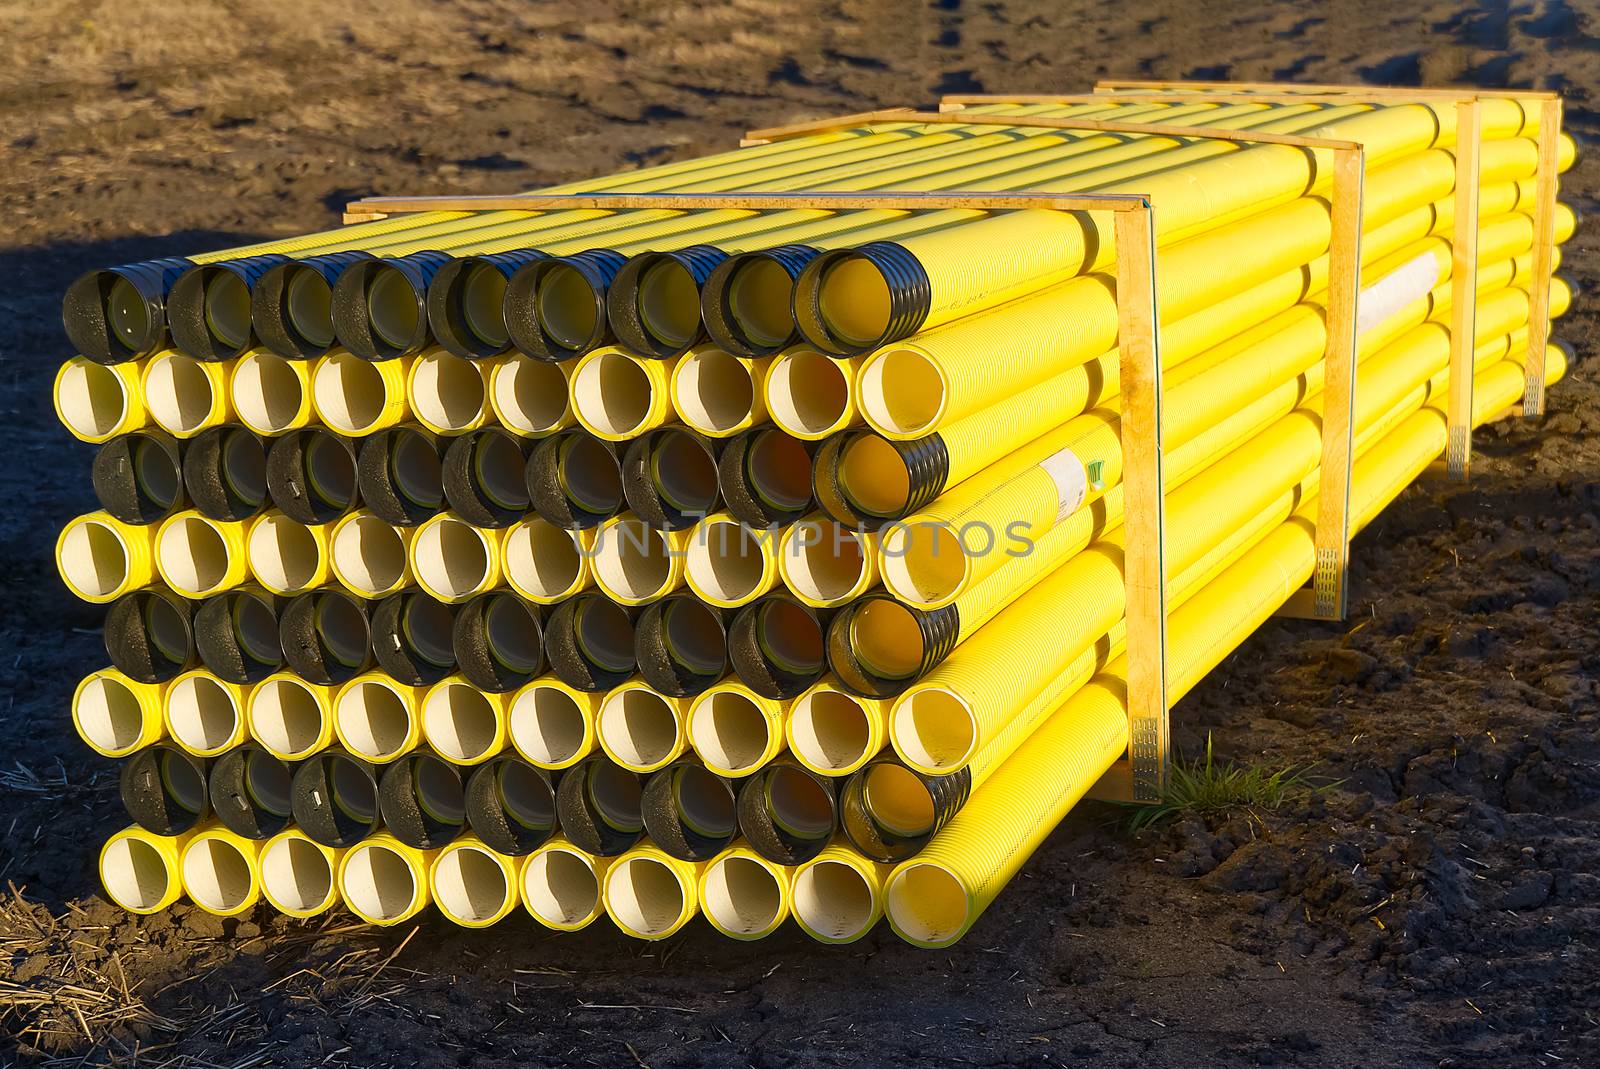 yellow plastic pipes for laying electricity cables underground. by PhotoTime